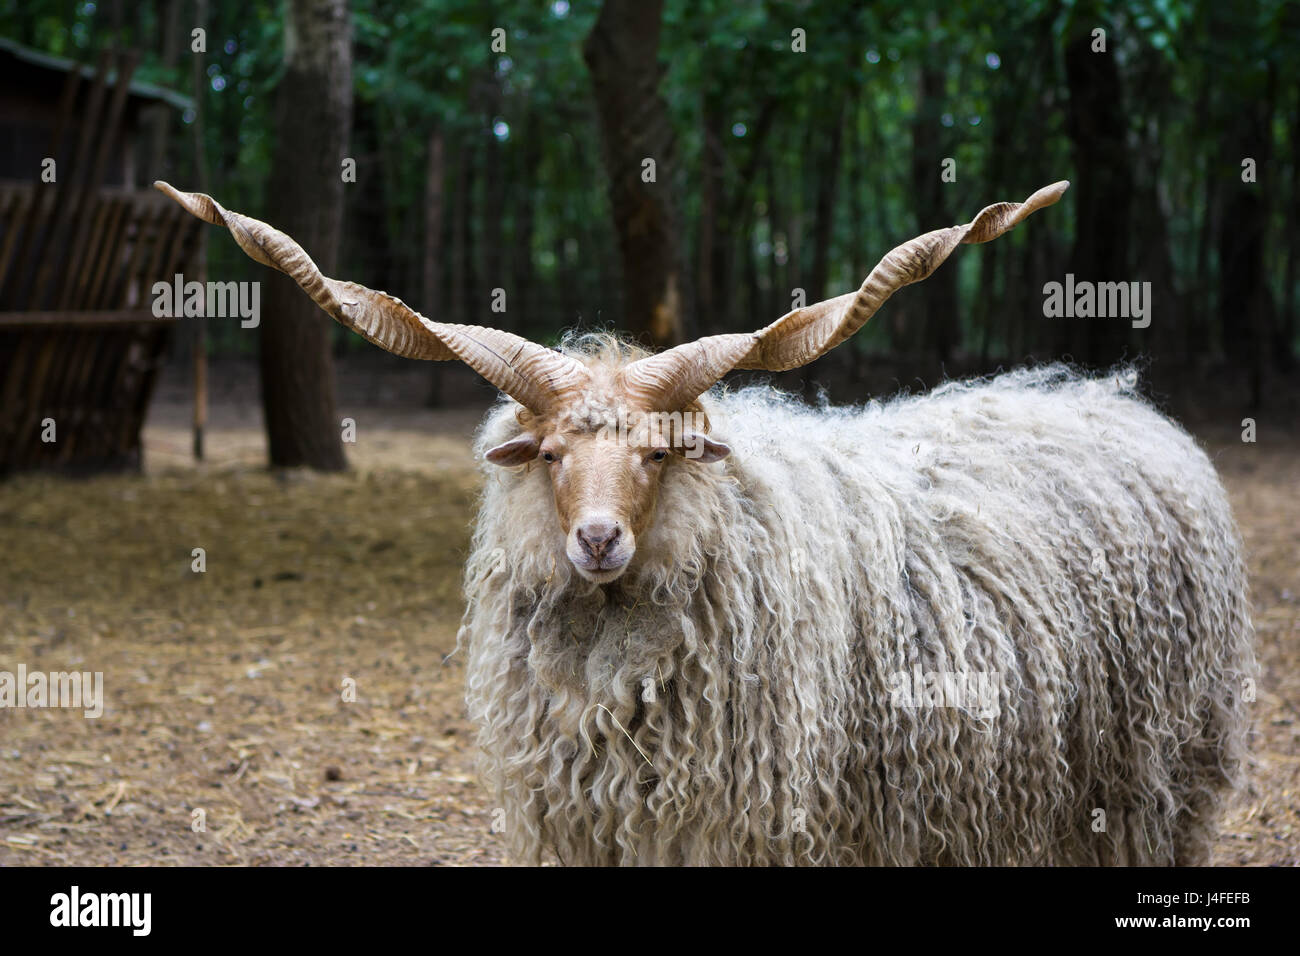 Lonely hungarian 'racka' sheep (Ovis aries strepsiceros Hortobagyiensis) standing in shade below trees. Stock Photo